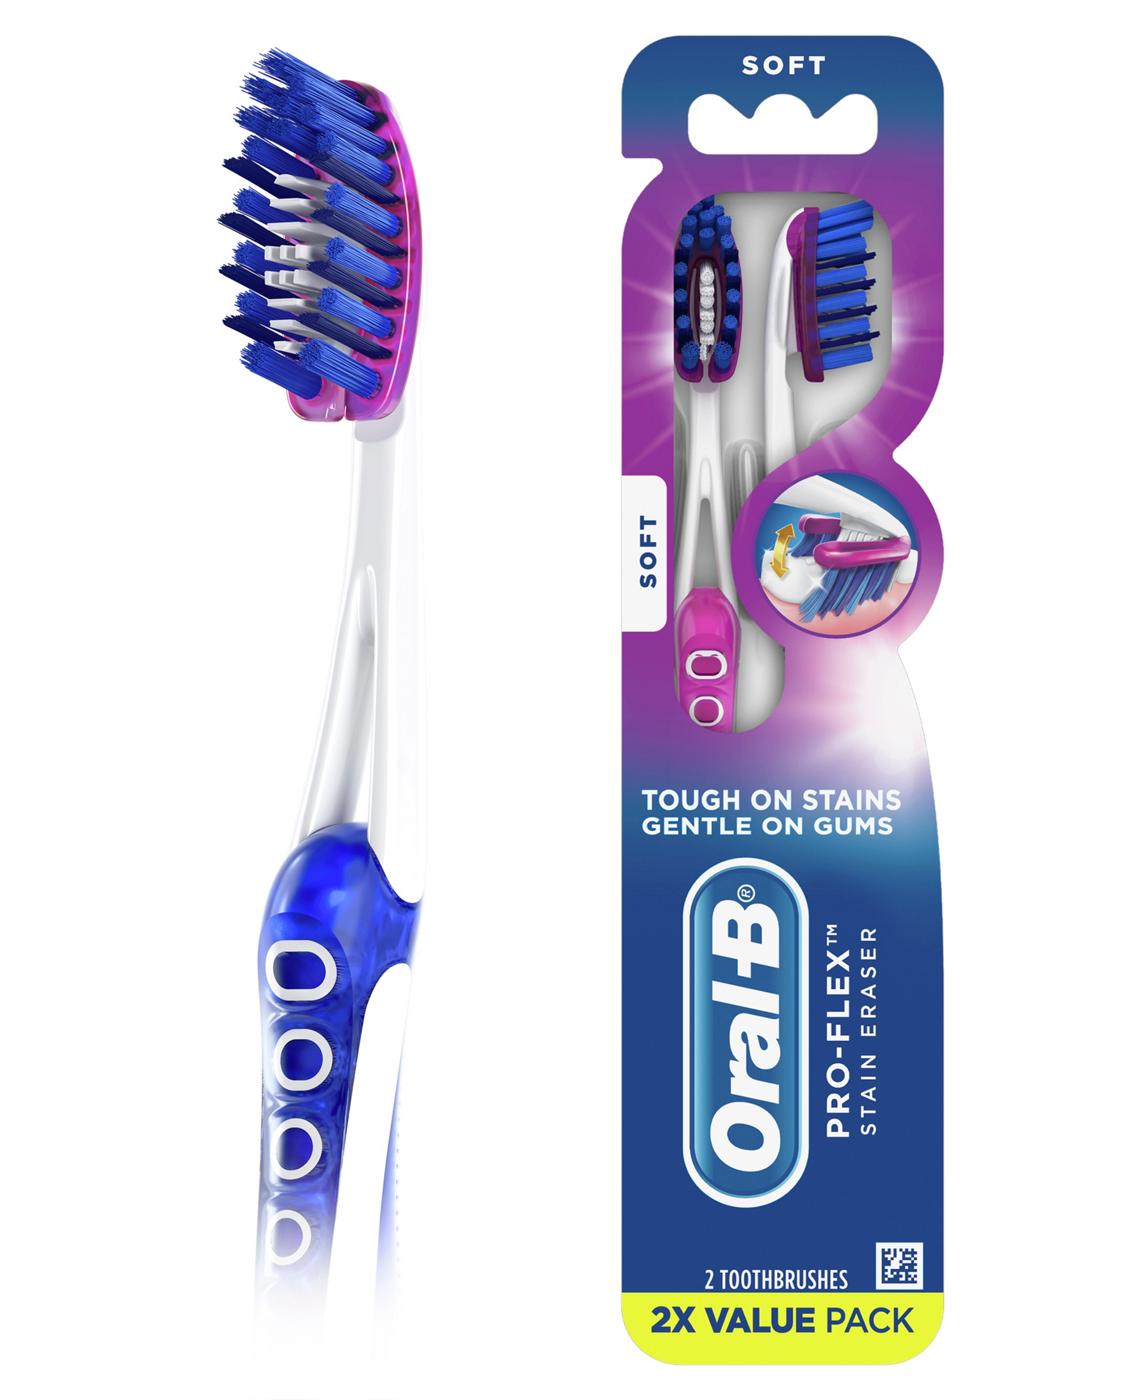 Oral-B Pro-Flex Stain Eraser Toothbrushes - Soft; image 2 of 9